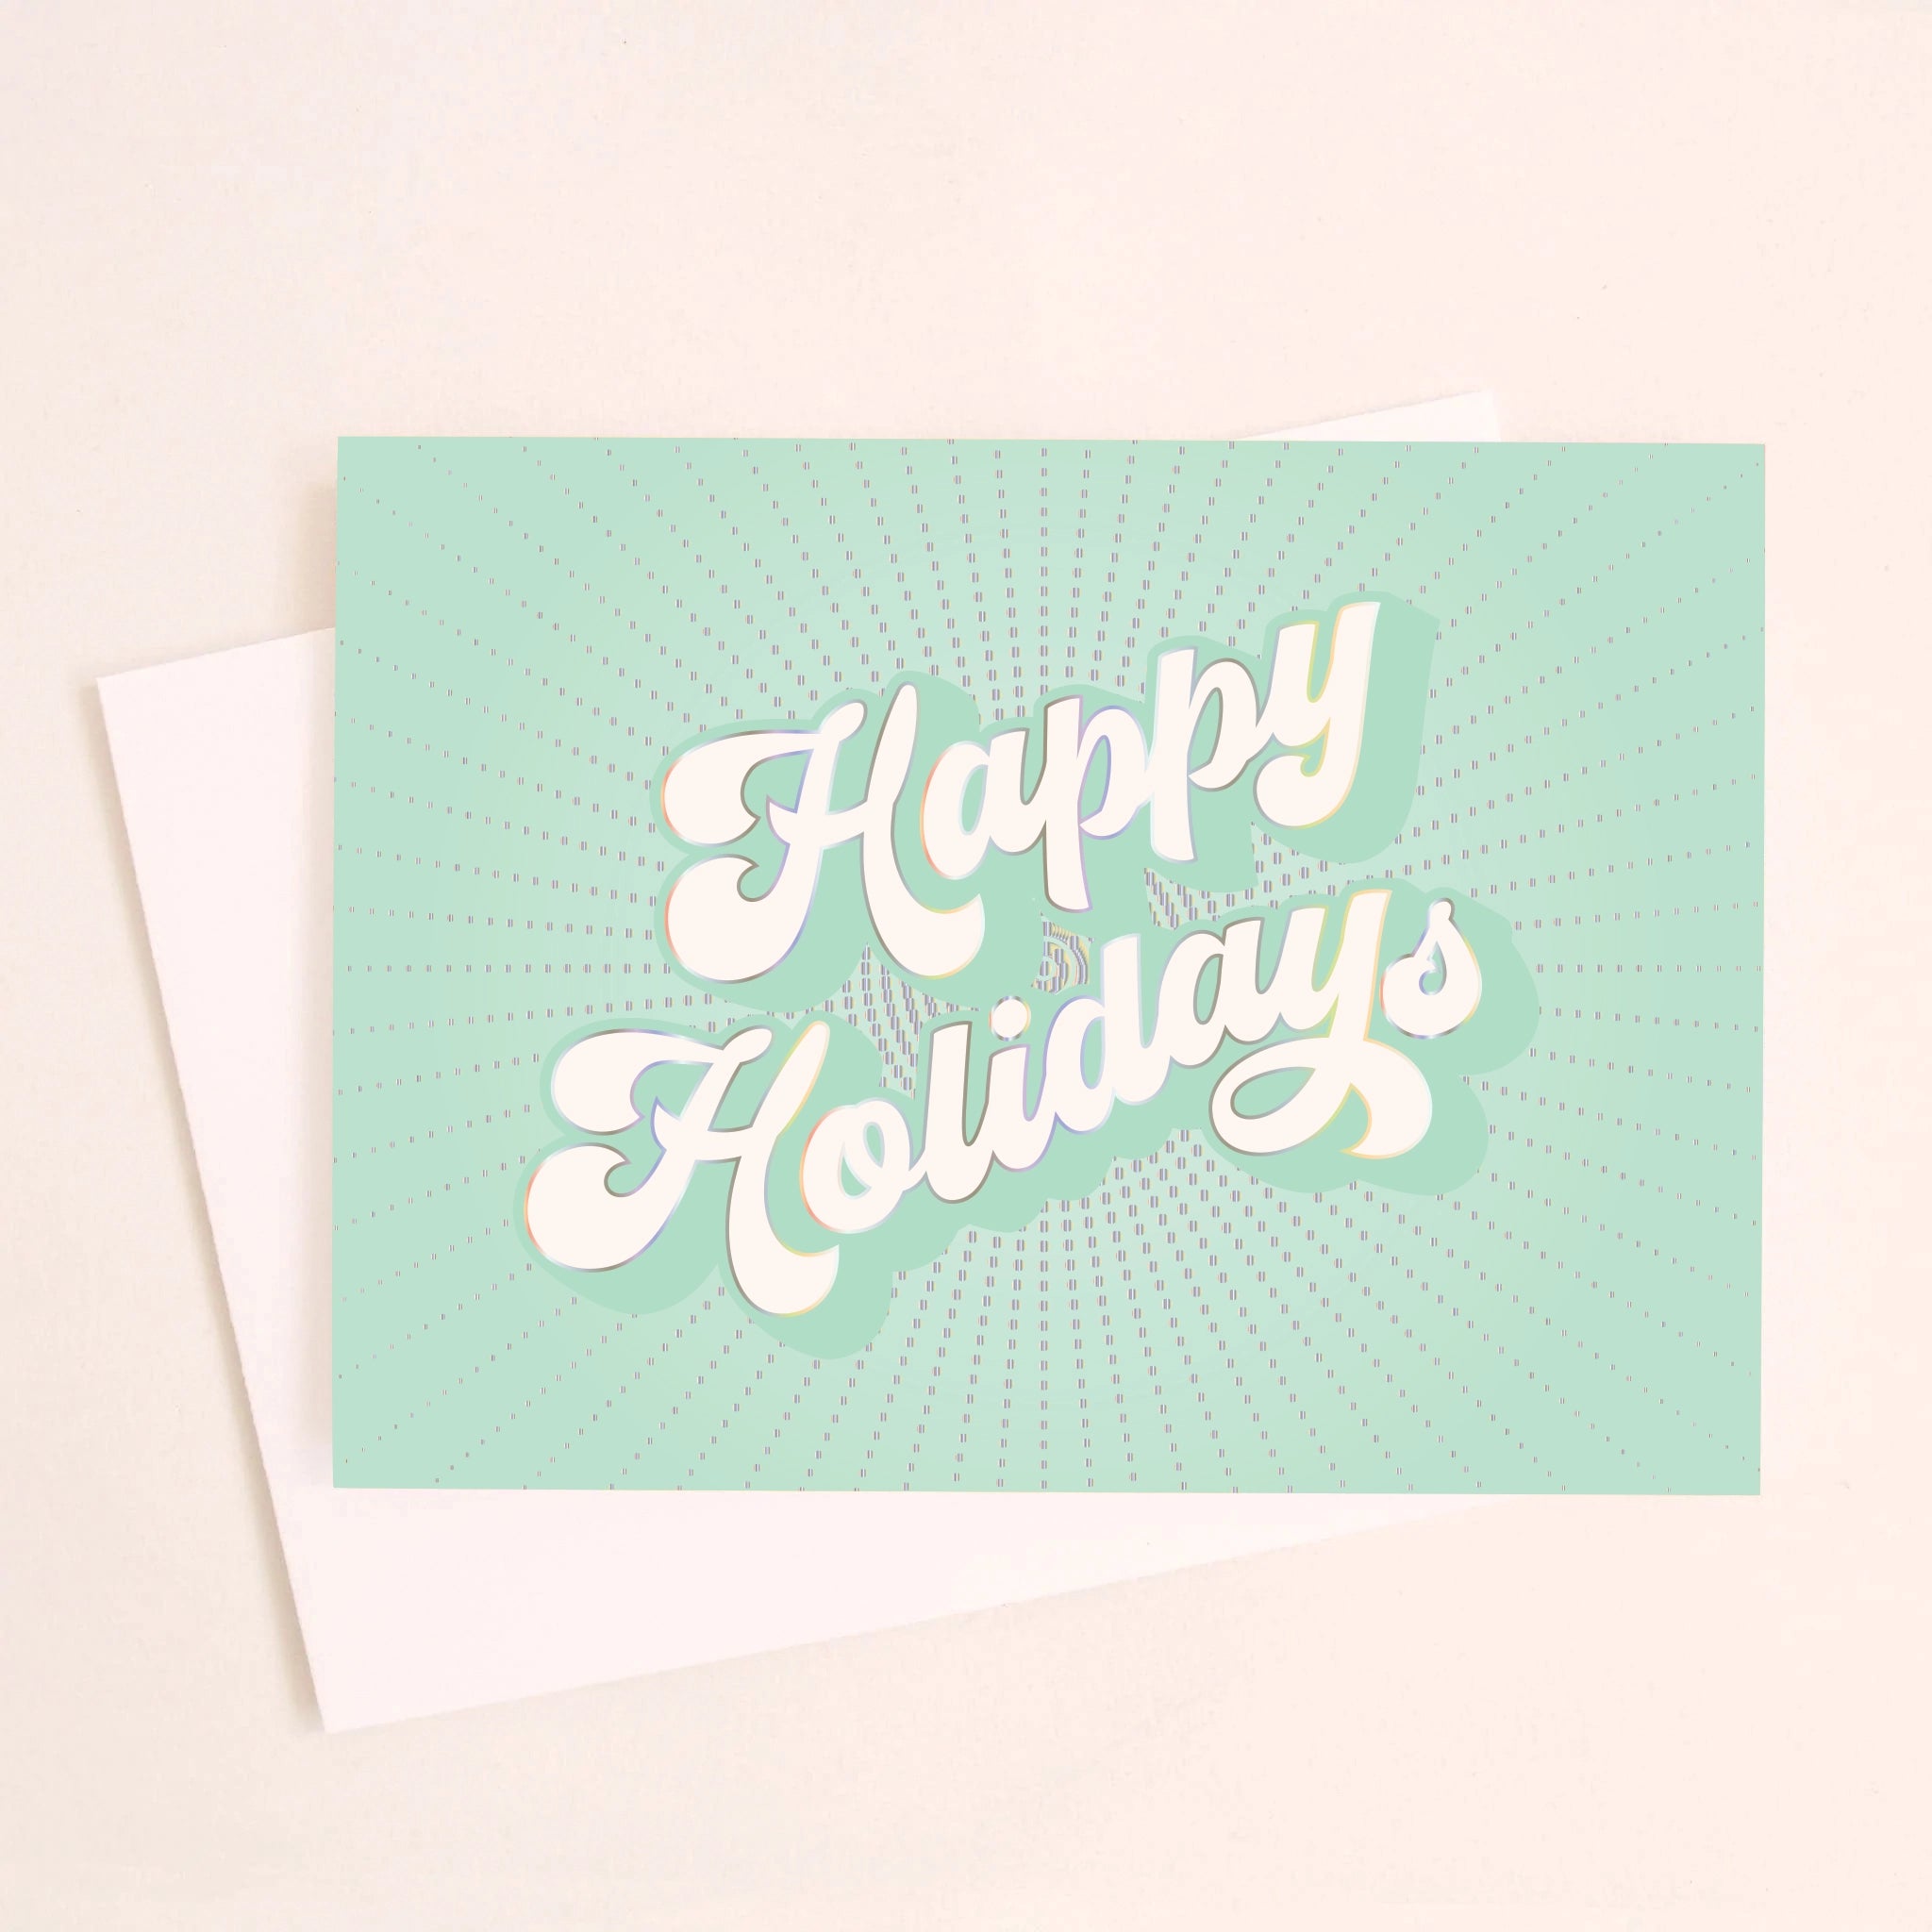 On an ivory background is a teal holiday greeting card with white text that reads, &quot;Happy Holidays&quot; along with a coordinating white envelope.